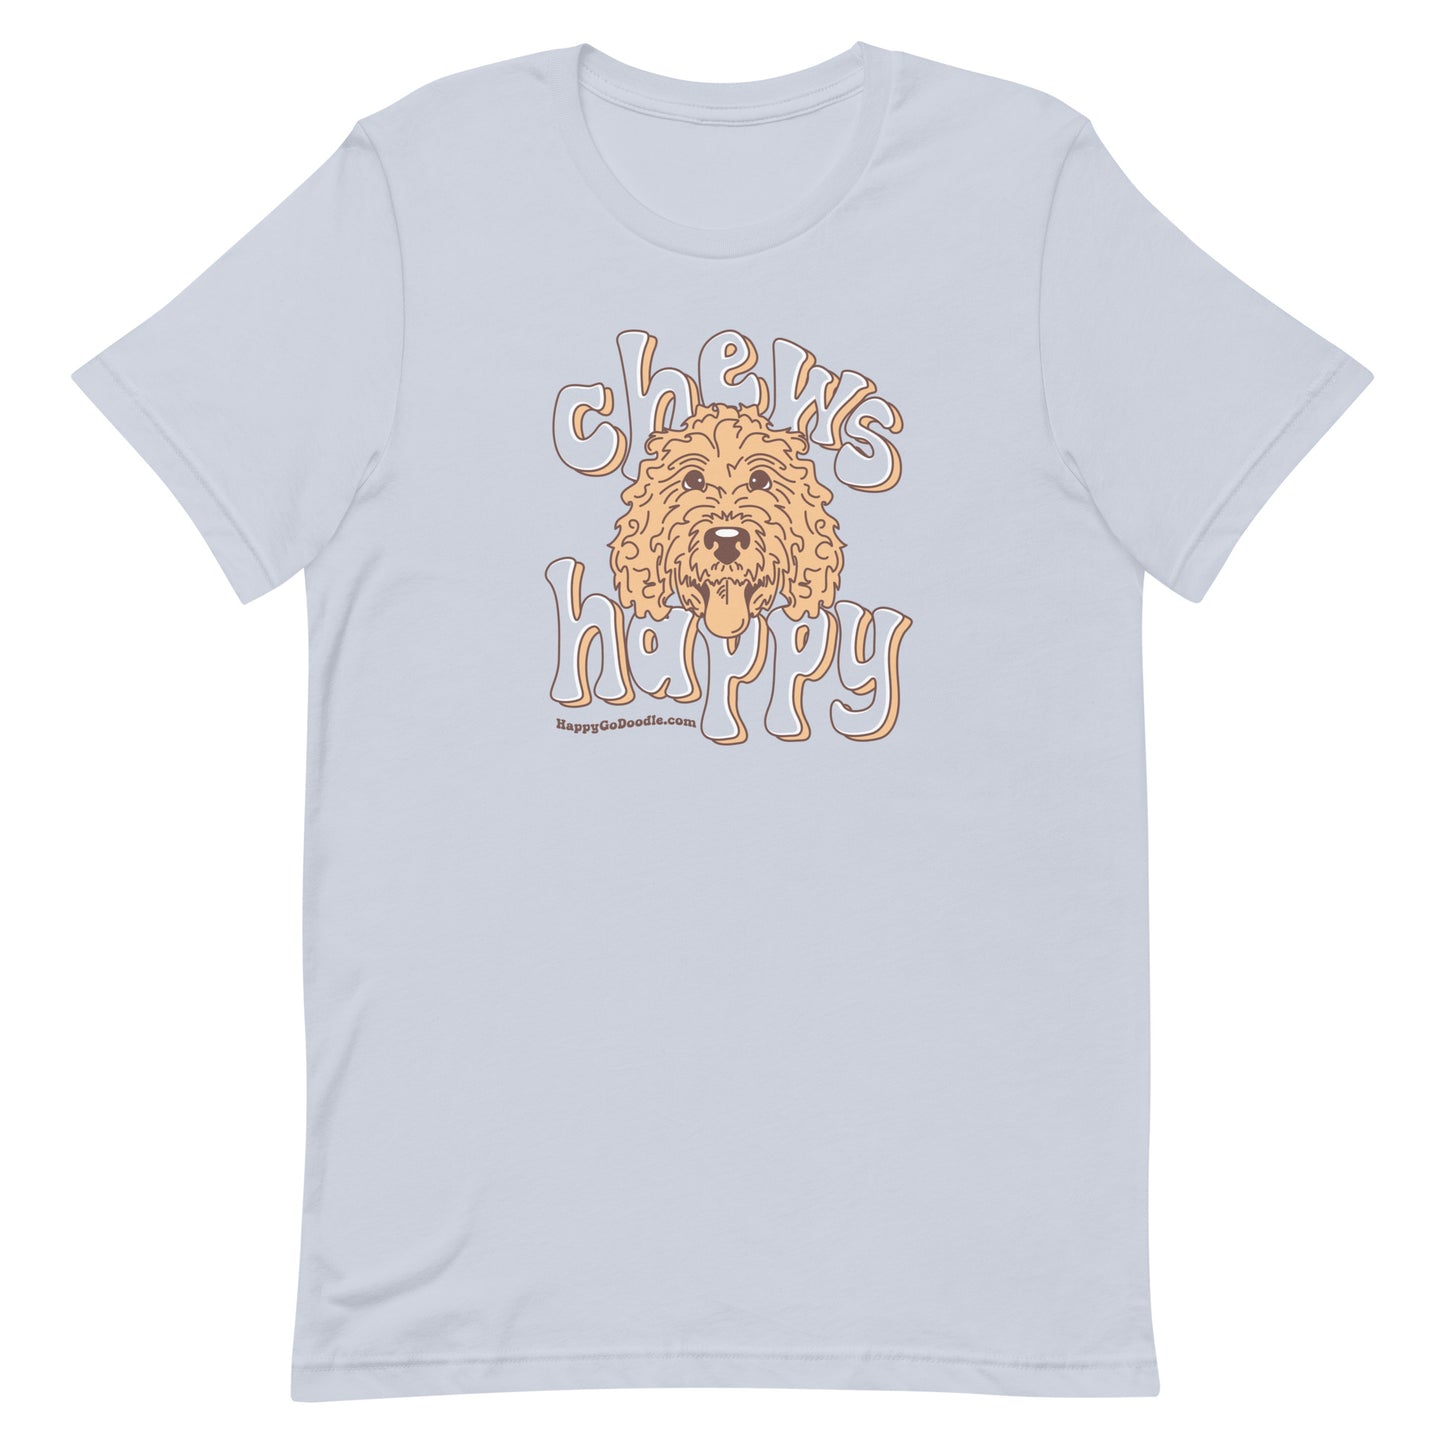 Goldendoodle crew neck sweatshirt with Goldendoodle face and words "Chews Happy" in light blue color